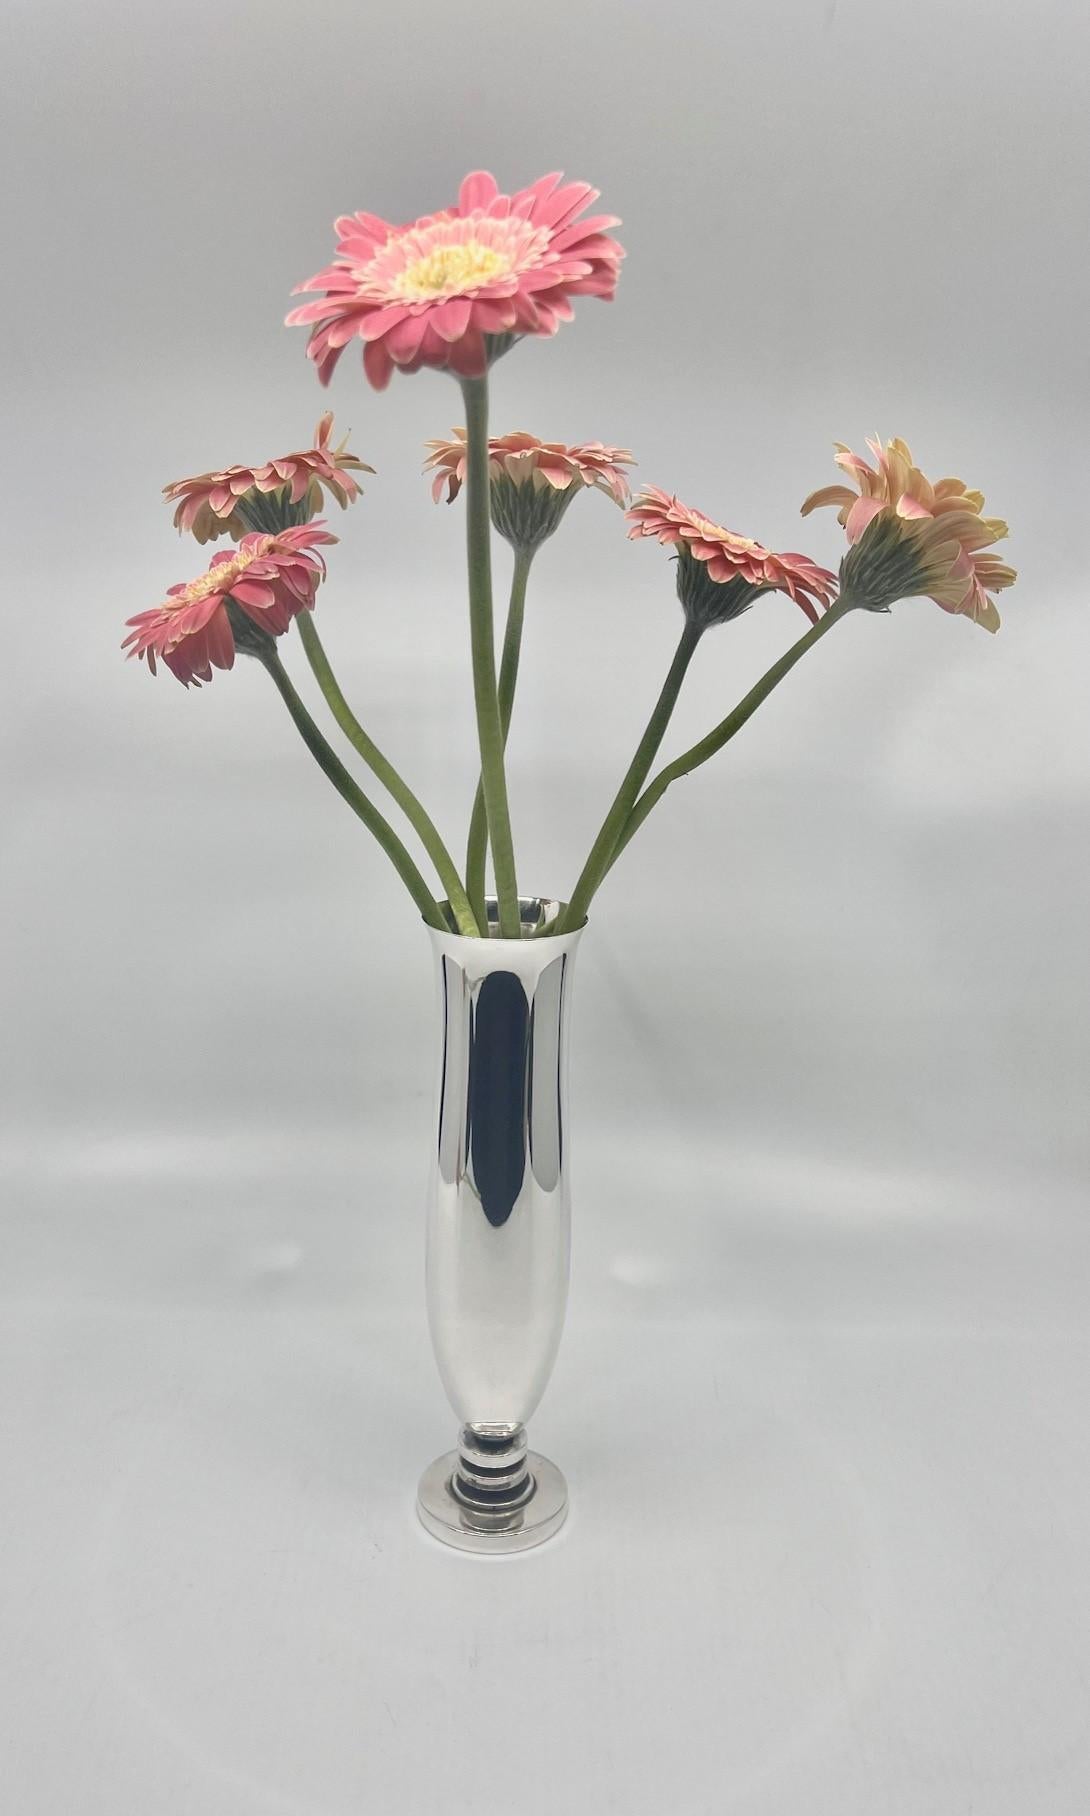 A Georg Jensen sterling silver Art Deco vase, design #750C by Harald Nielsen from 1935. A thin fluted form vase that sits on two hollow rings and a round base.

Dimensions: Measures 7 3/4? (19.8cm) in height. Weighs: 7.76oz (220g).

Hallmarks: